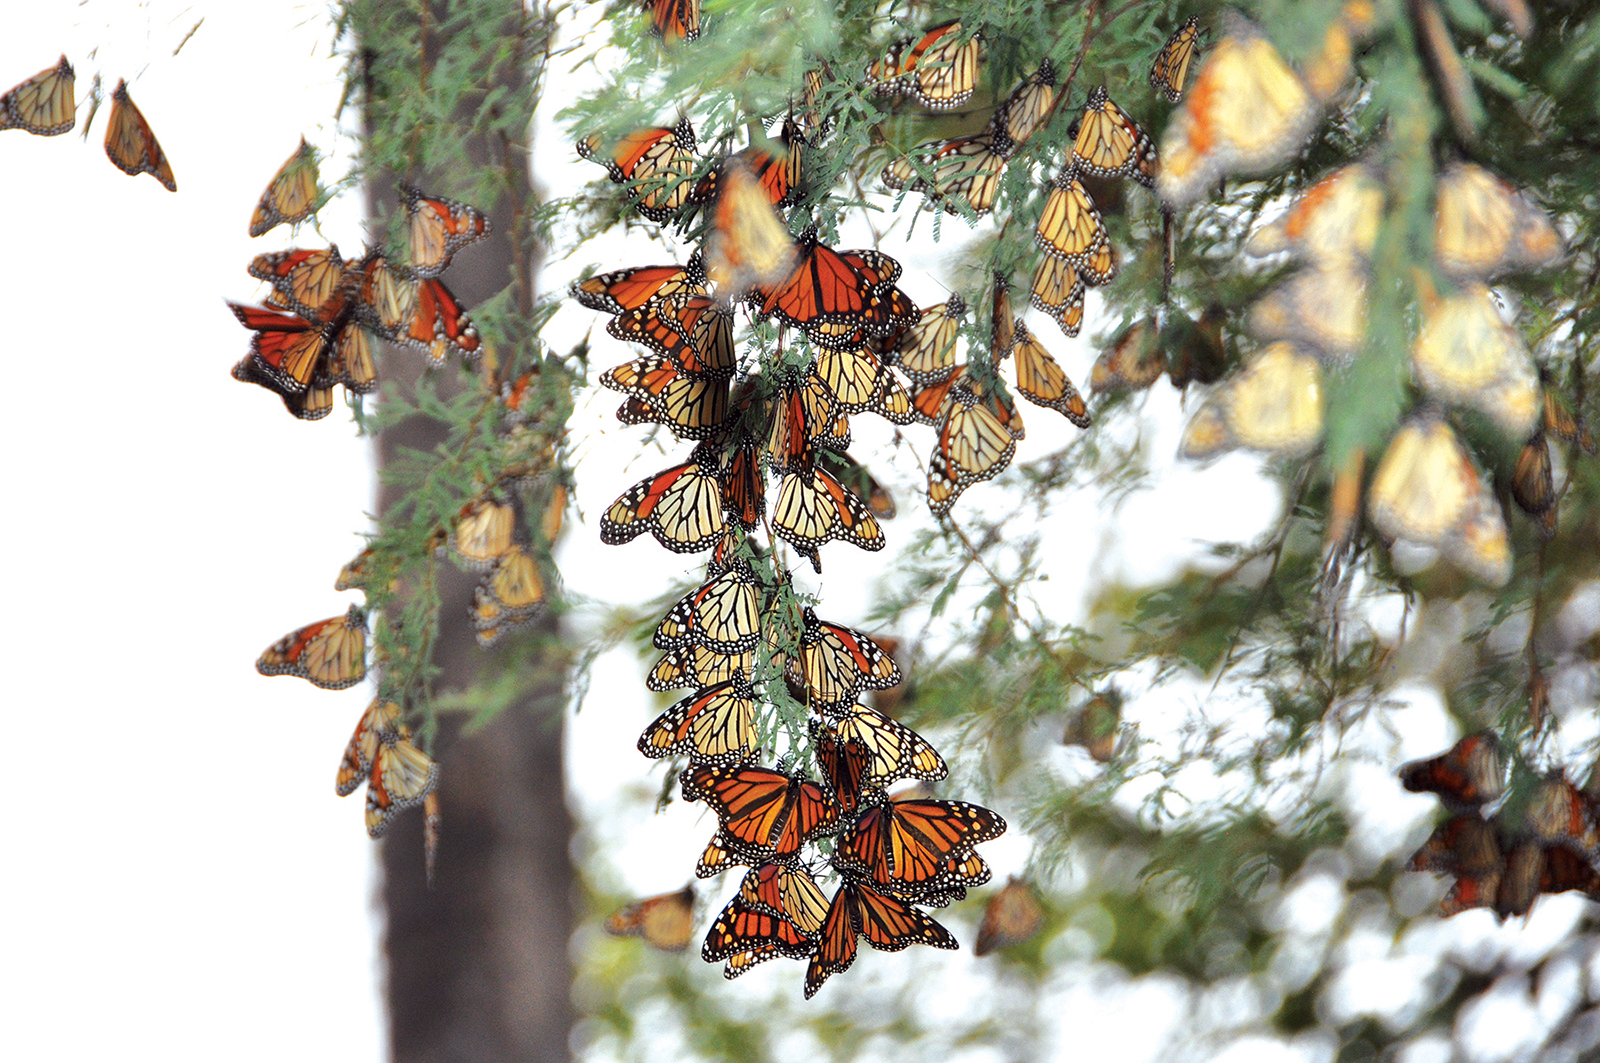 Nearly a billion Monarch butterflies have vanished since 1990